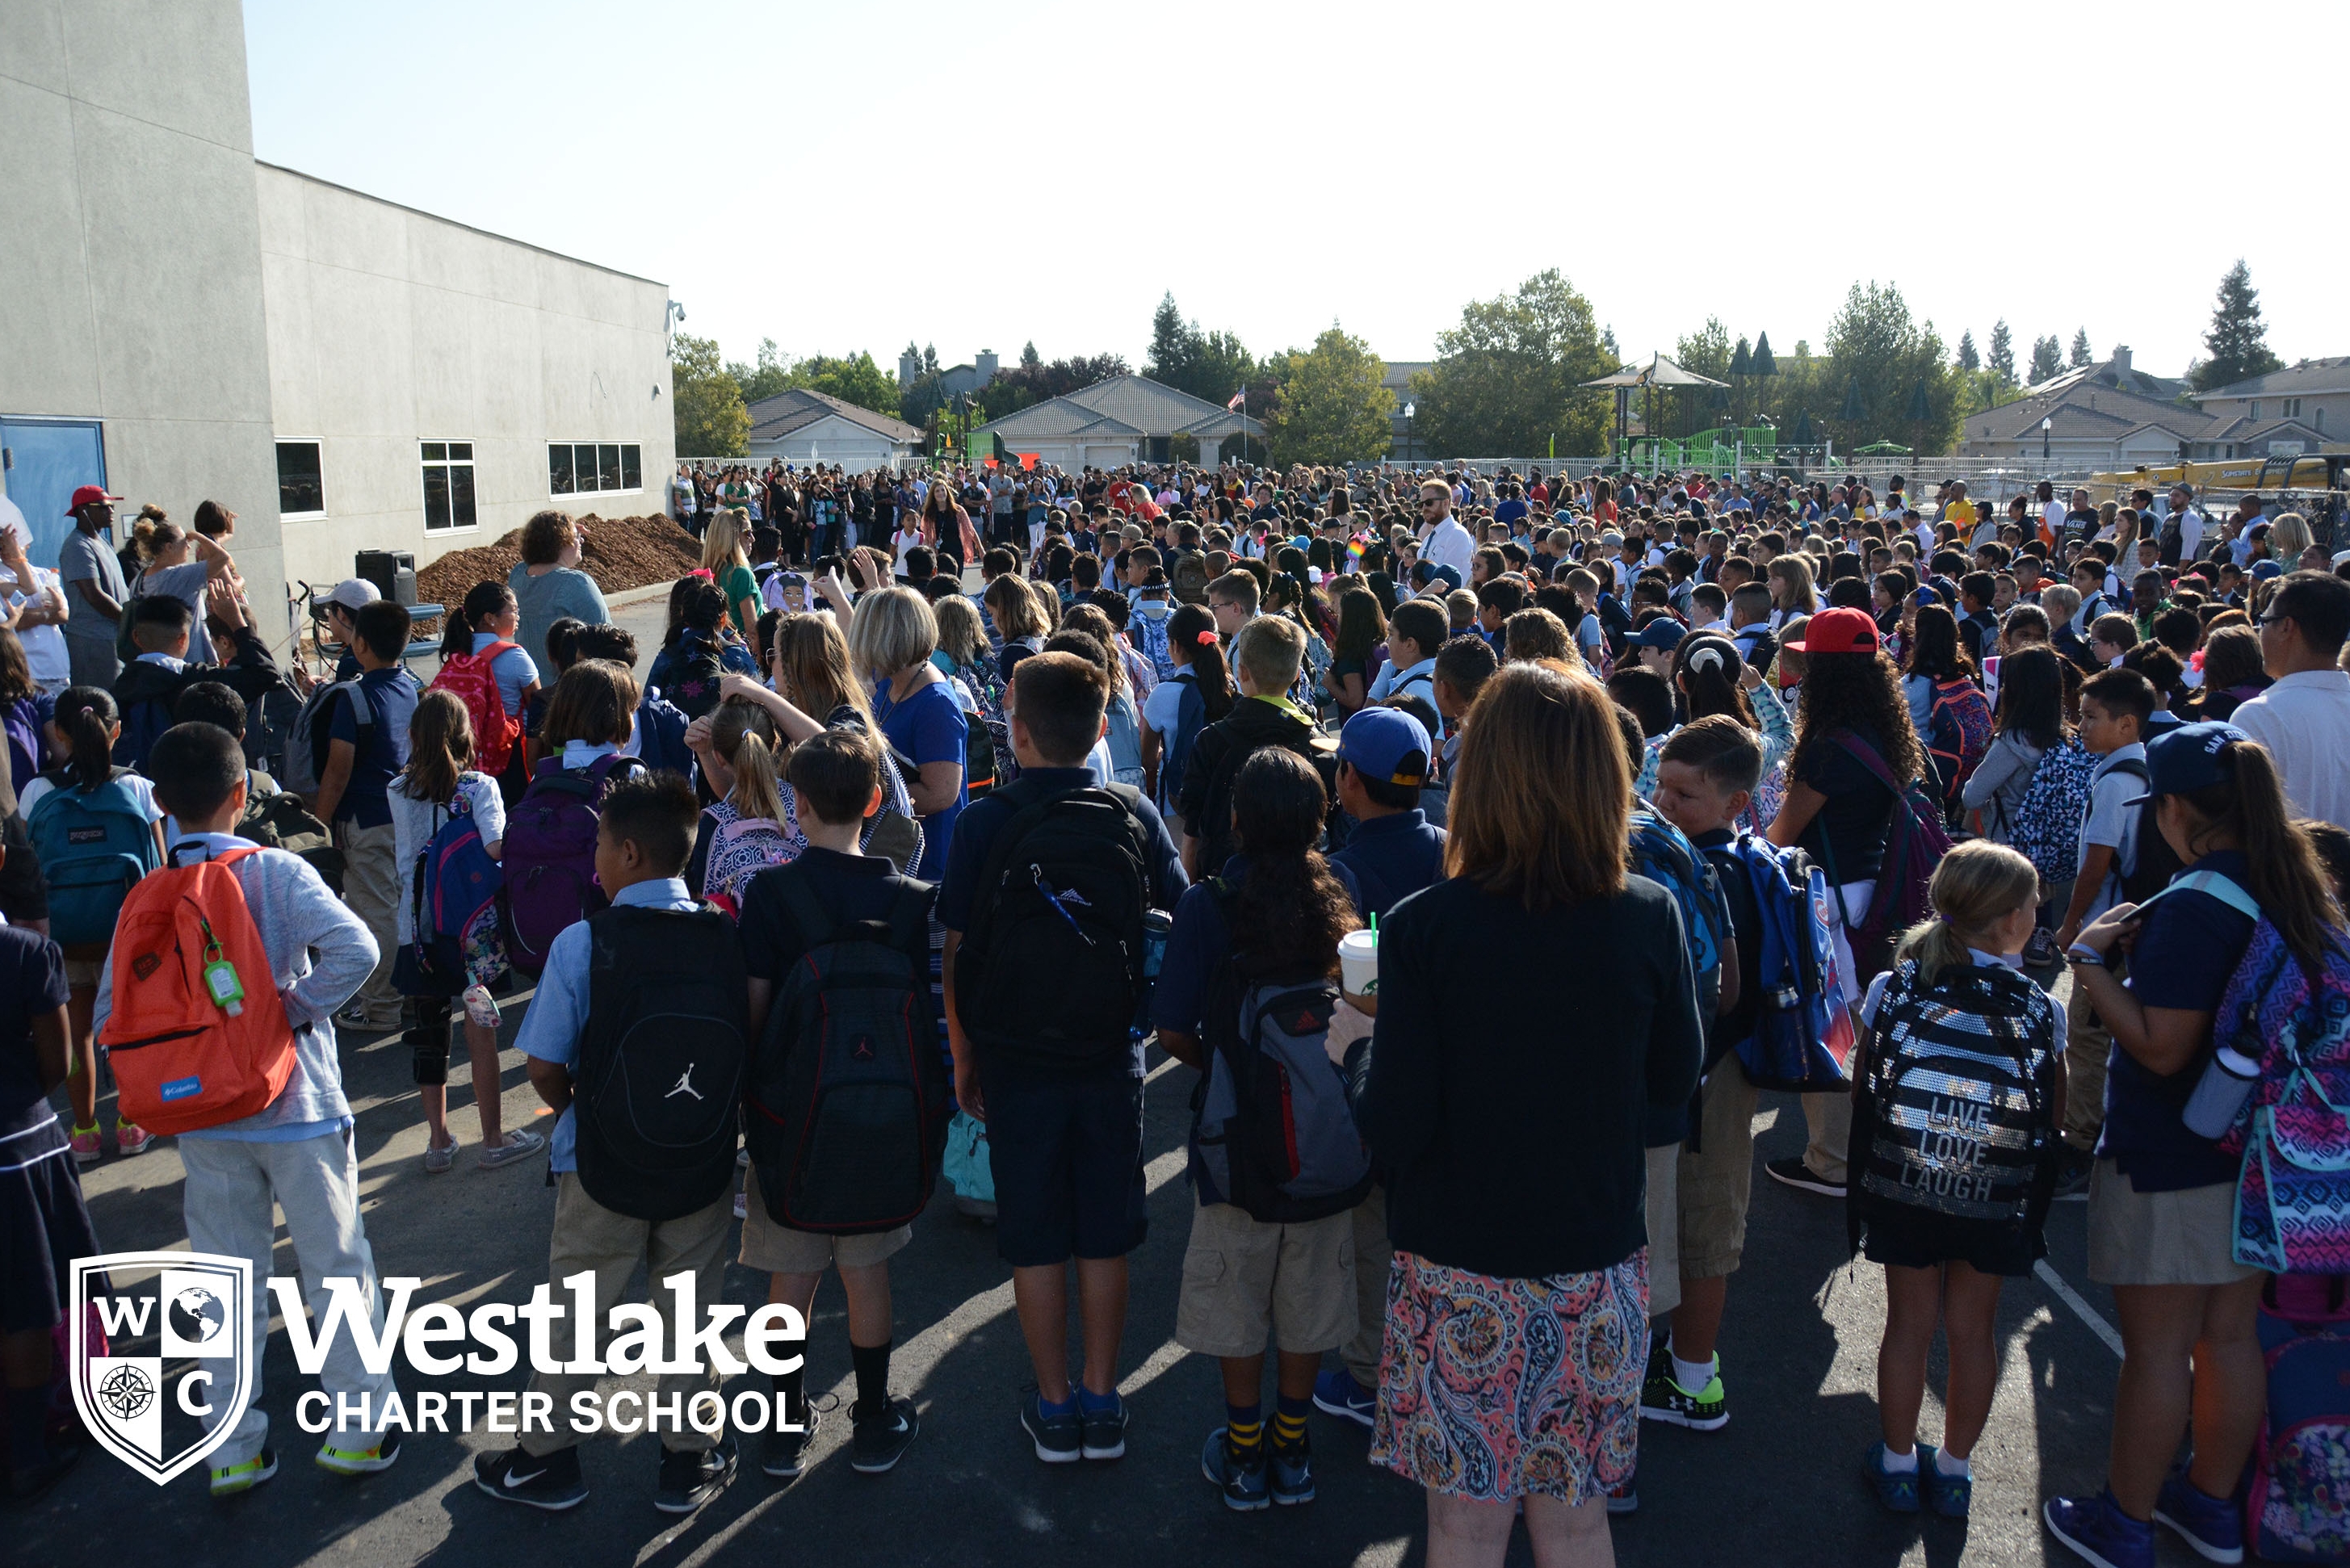 Thank you to the hundreds of families that worked together to make our first day of school so magical. Look at this picture, our entire Kindergarten through eighth grade community all together on one amazing campus.